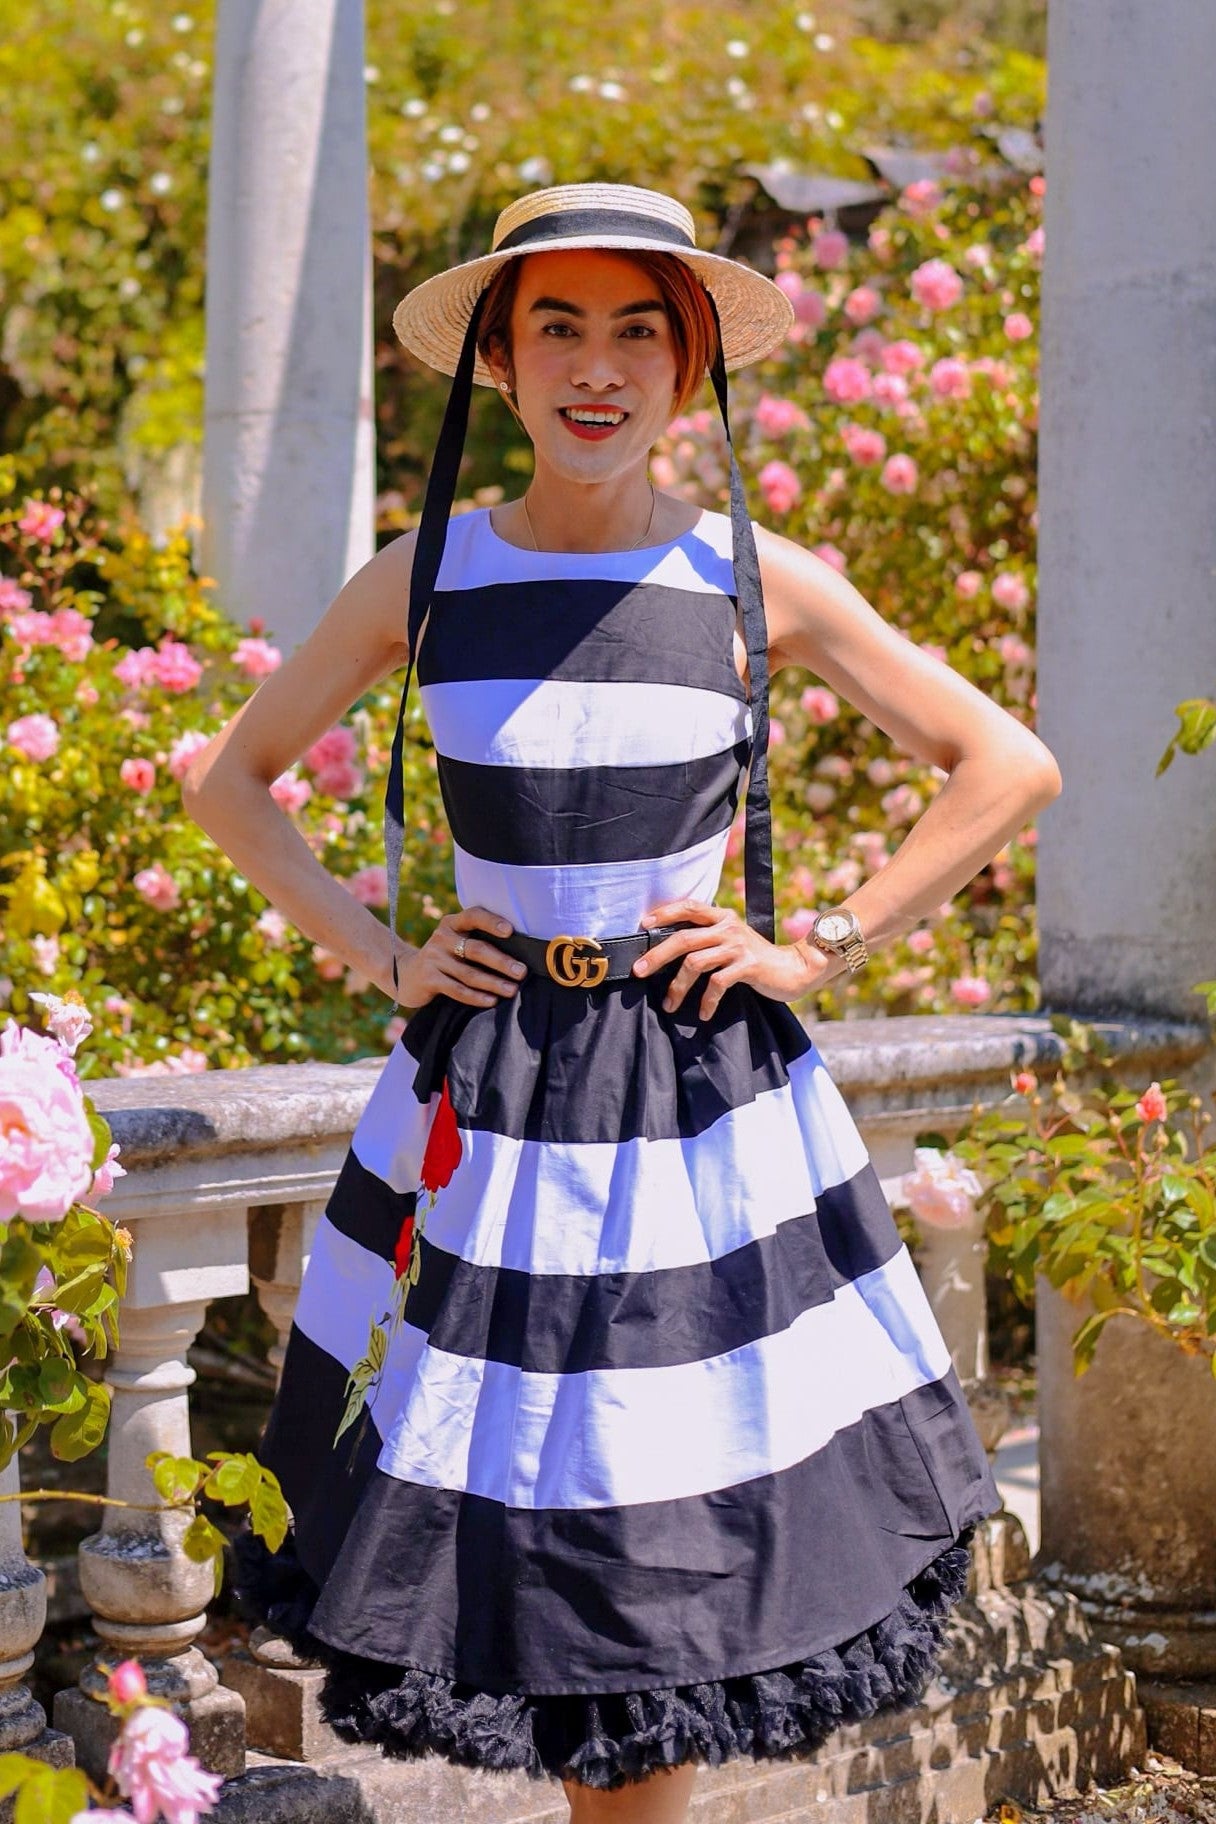 Customer wears the black and white striped Annie swing dress, with embroidered red rose on the skirt, with petticoat, in a garden